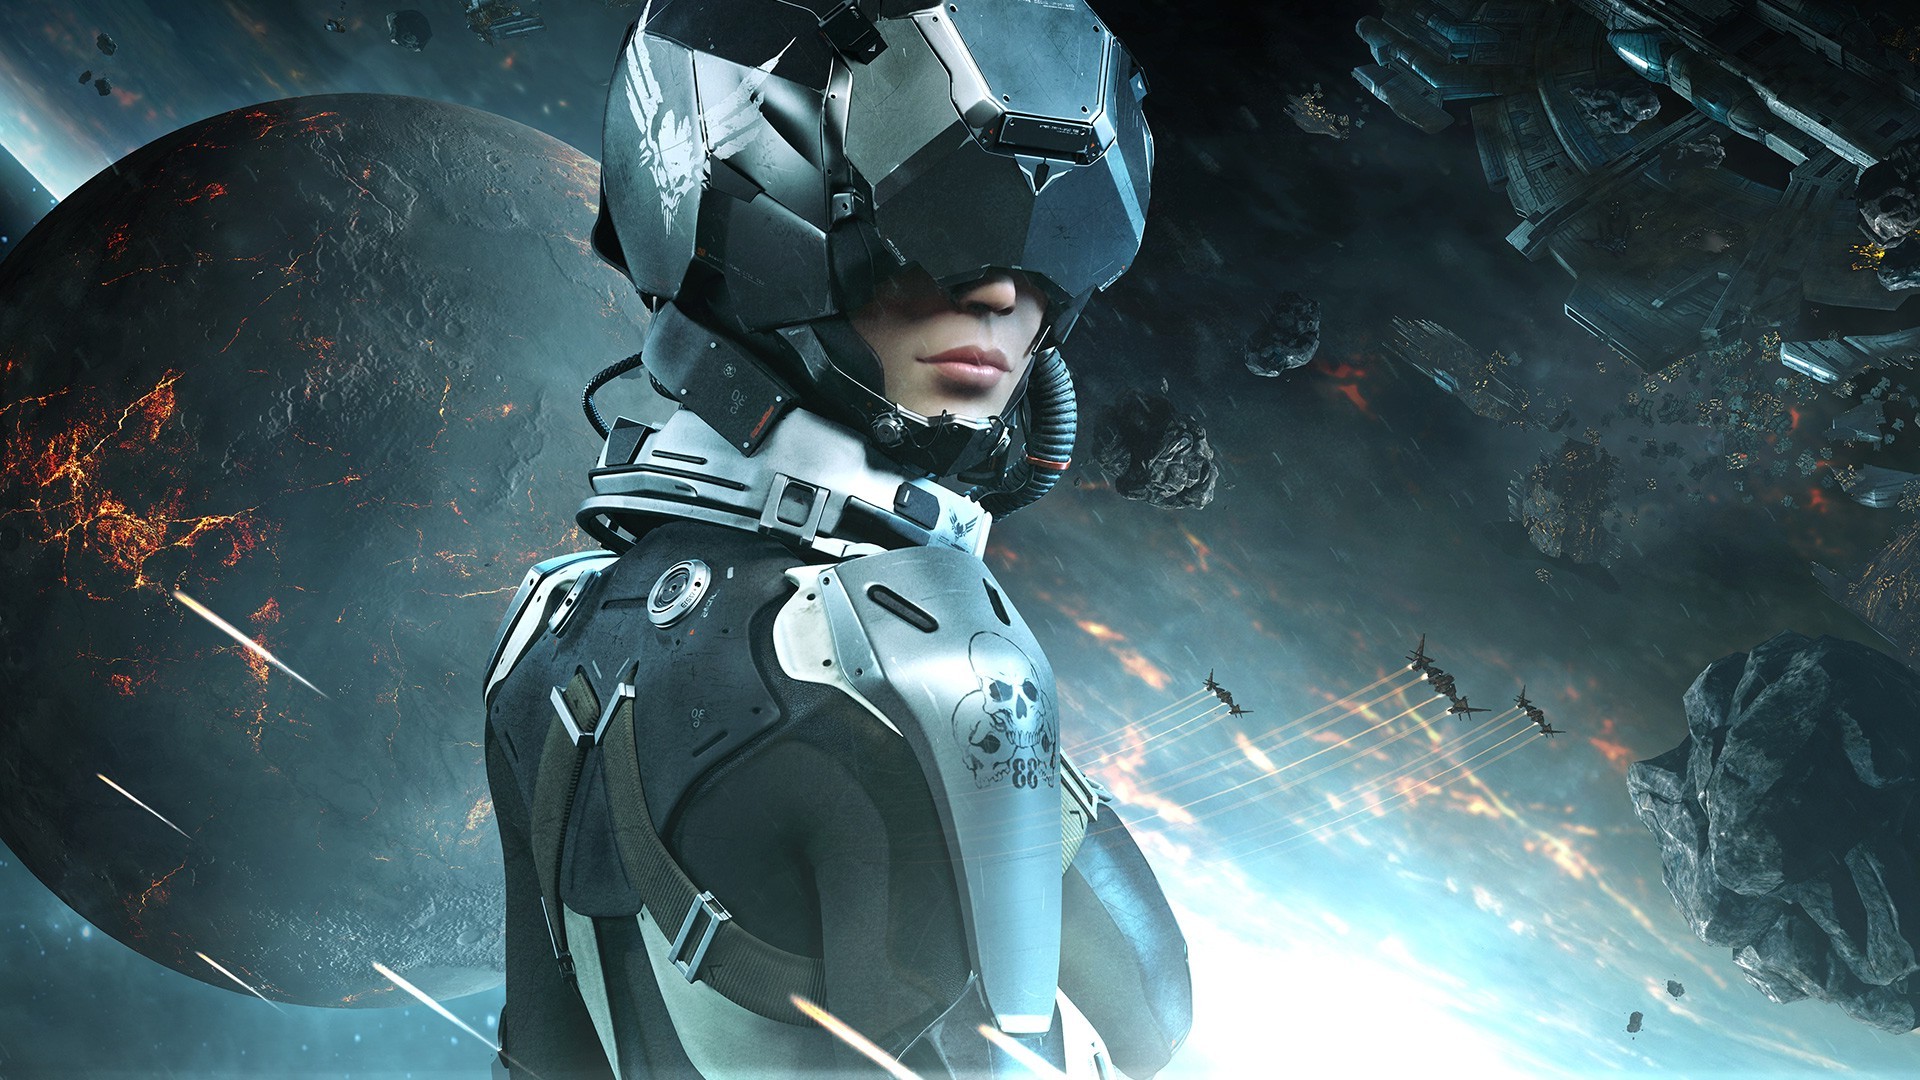 video Games, PC Gaming, Space, EVE Valkyrie Wallpaper